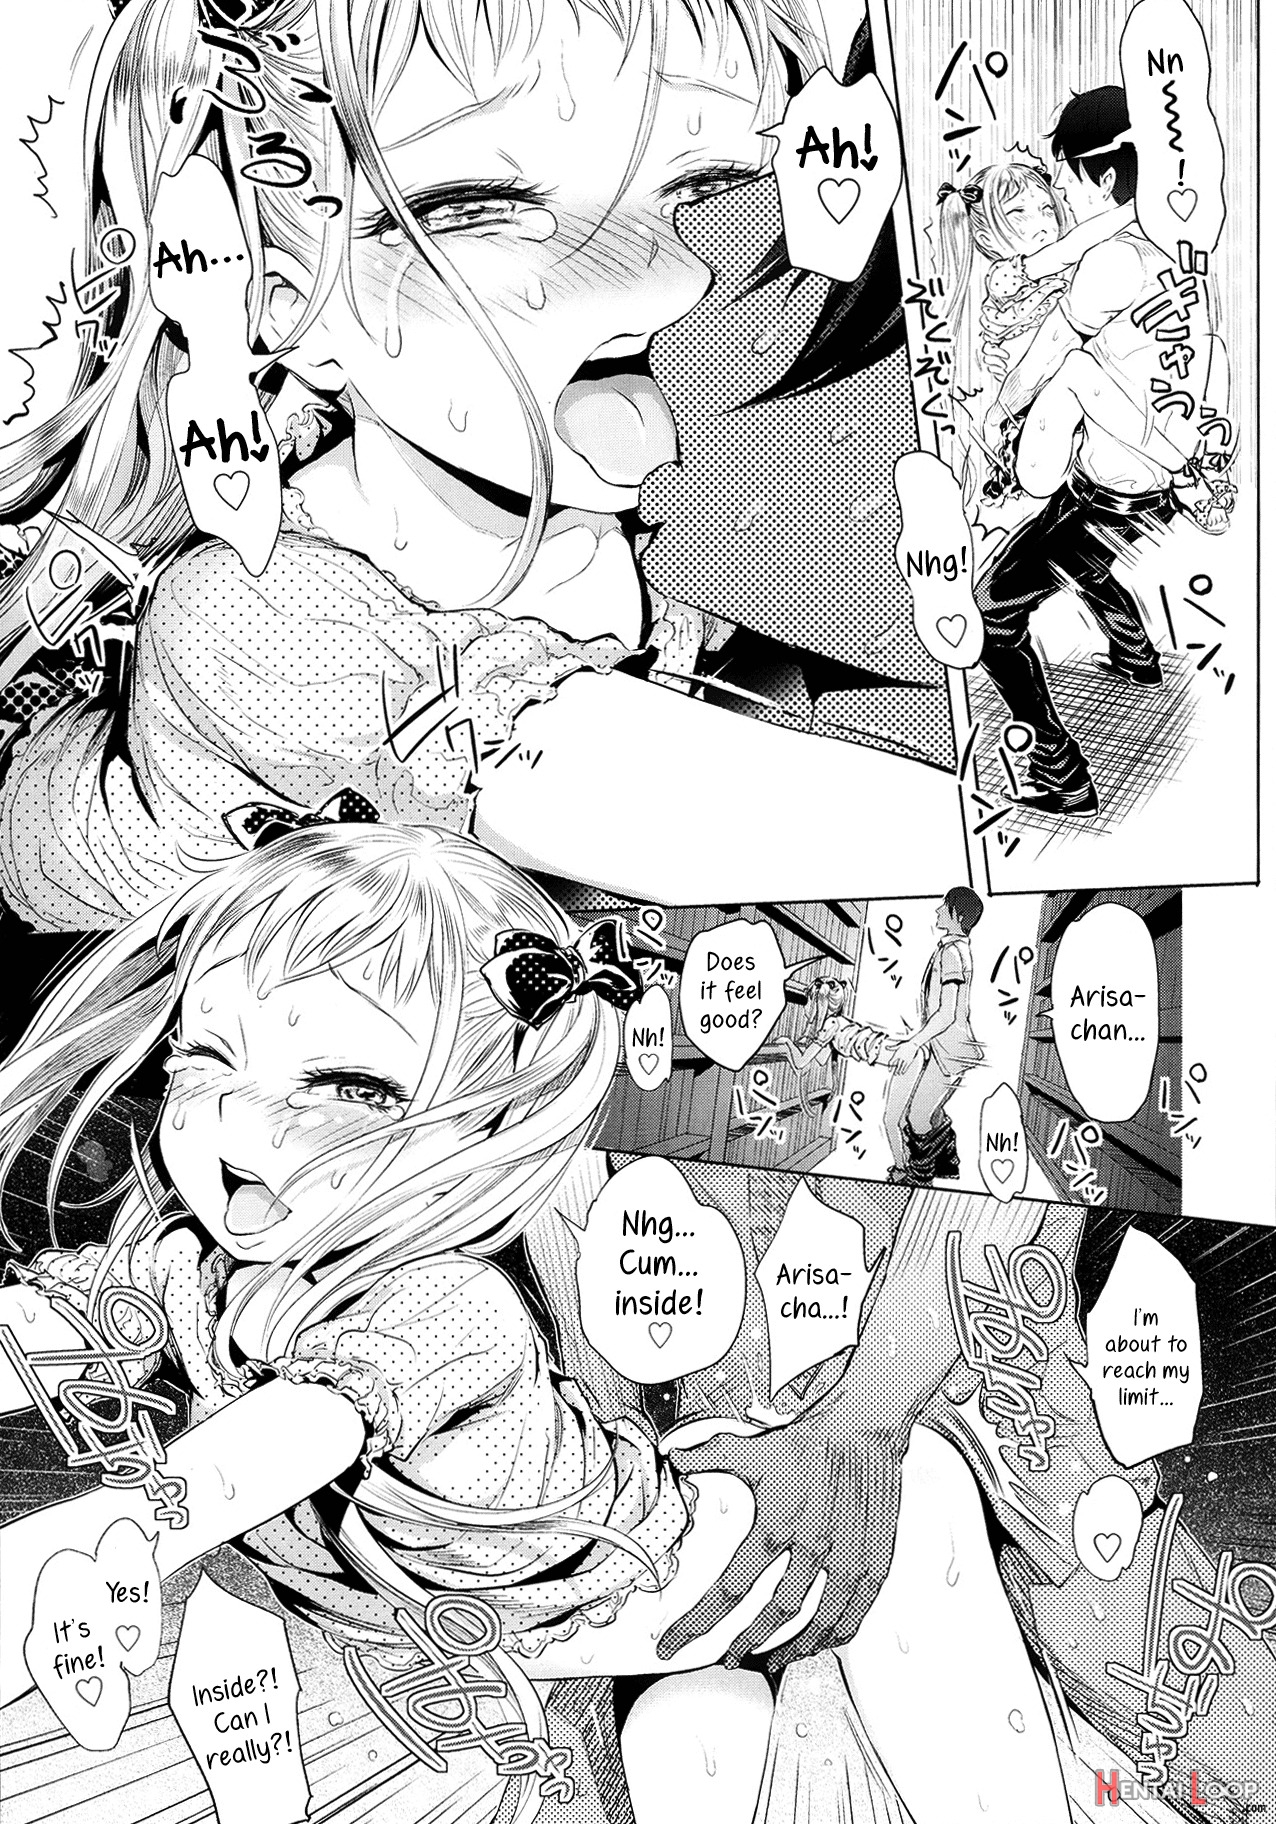 Arisa's Bitch Project page 17